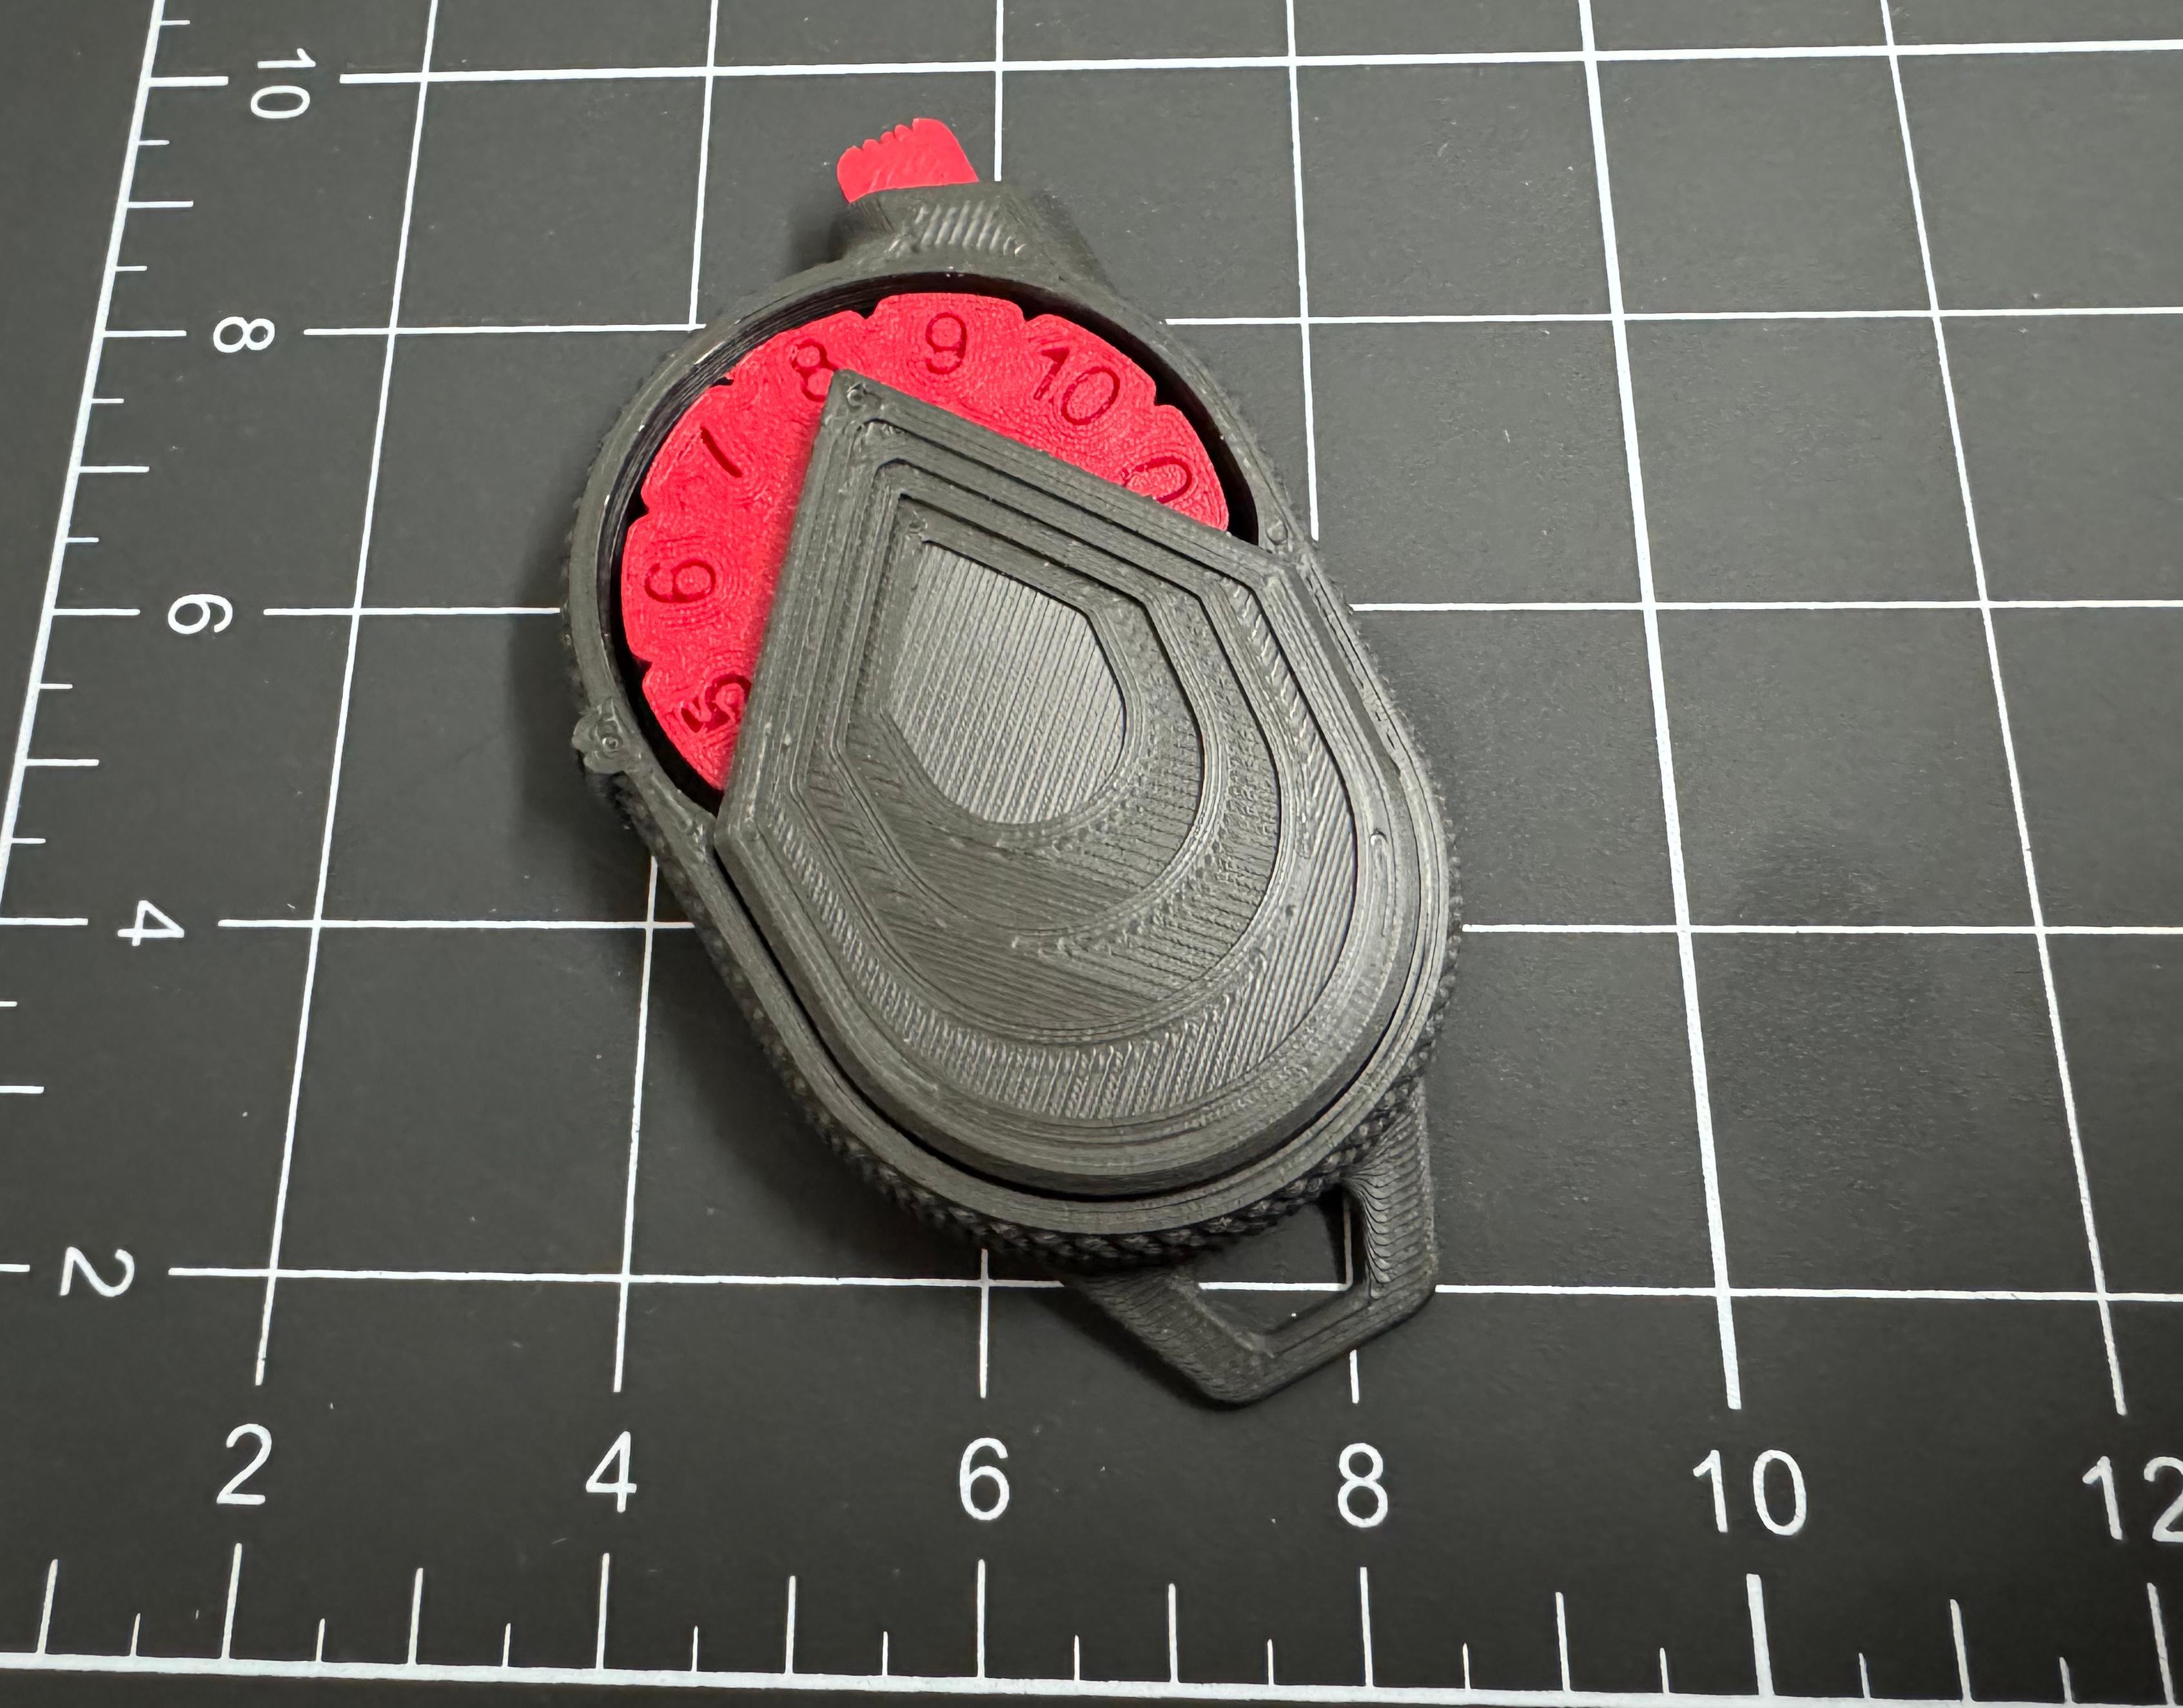 Mechanical Counter 0-10 - V1 - thanks for the easy print design and it's got a really satisfying click - 3d model